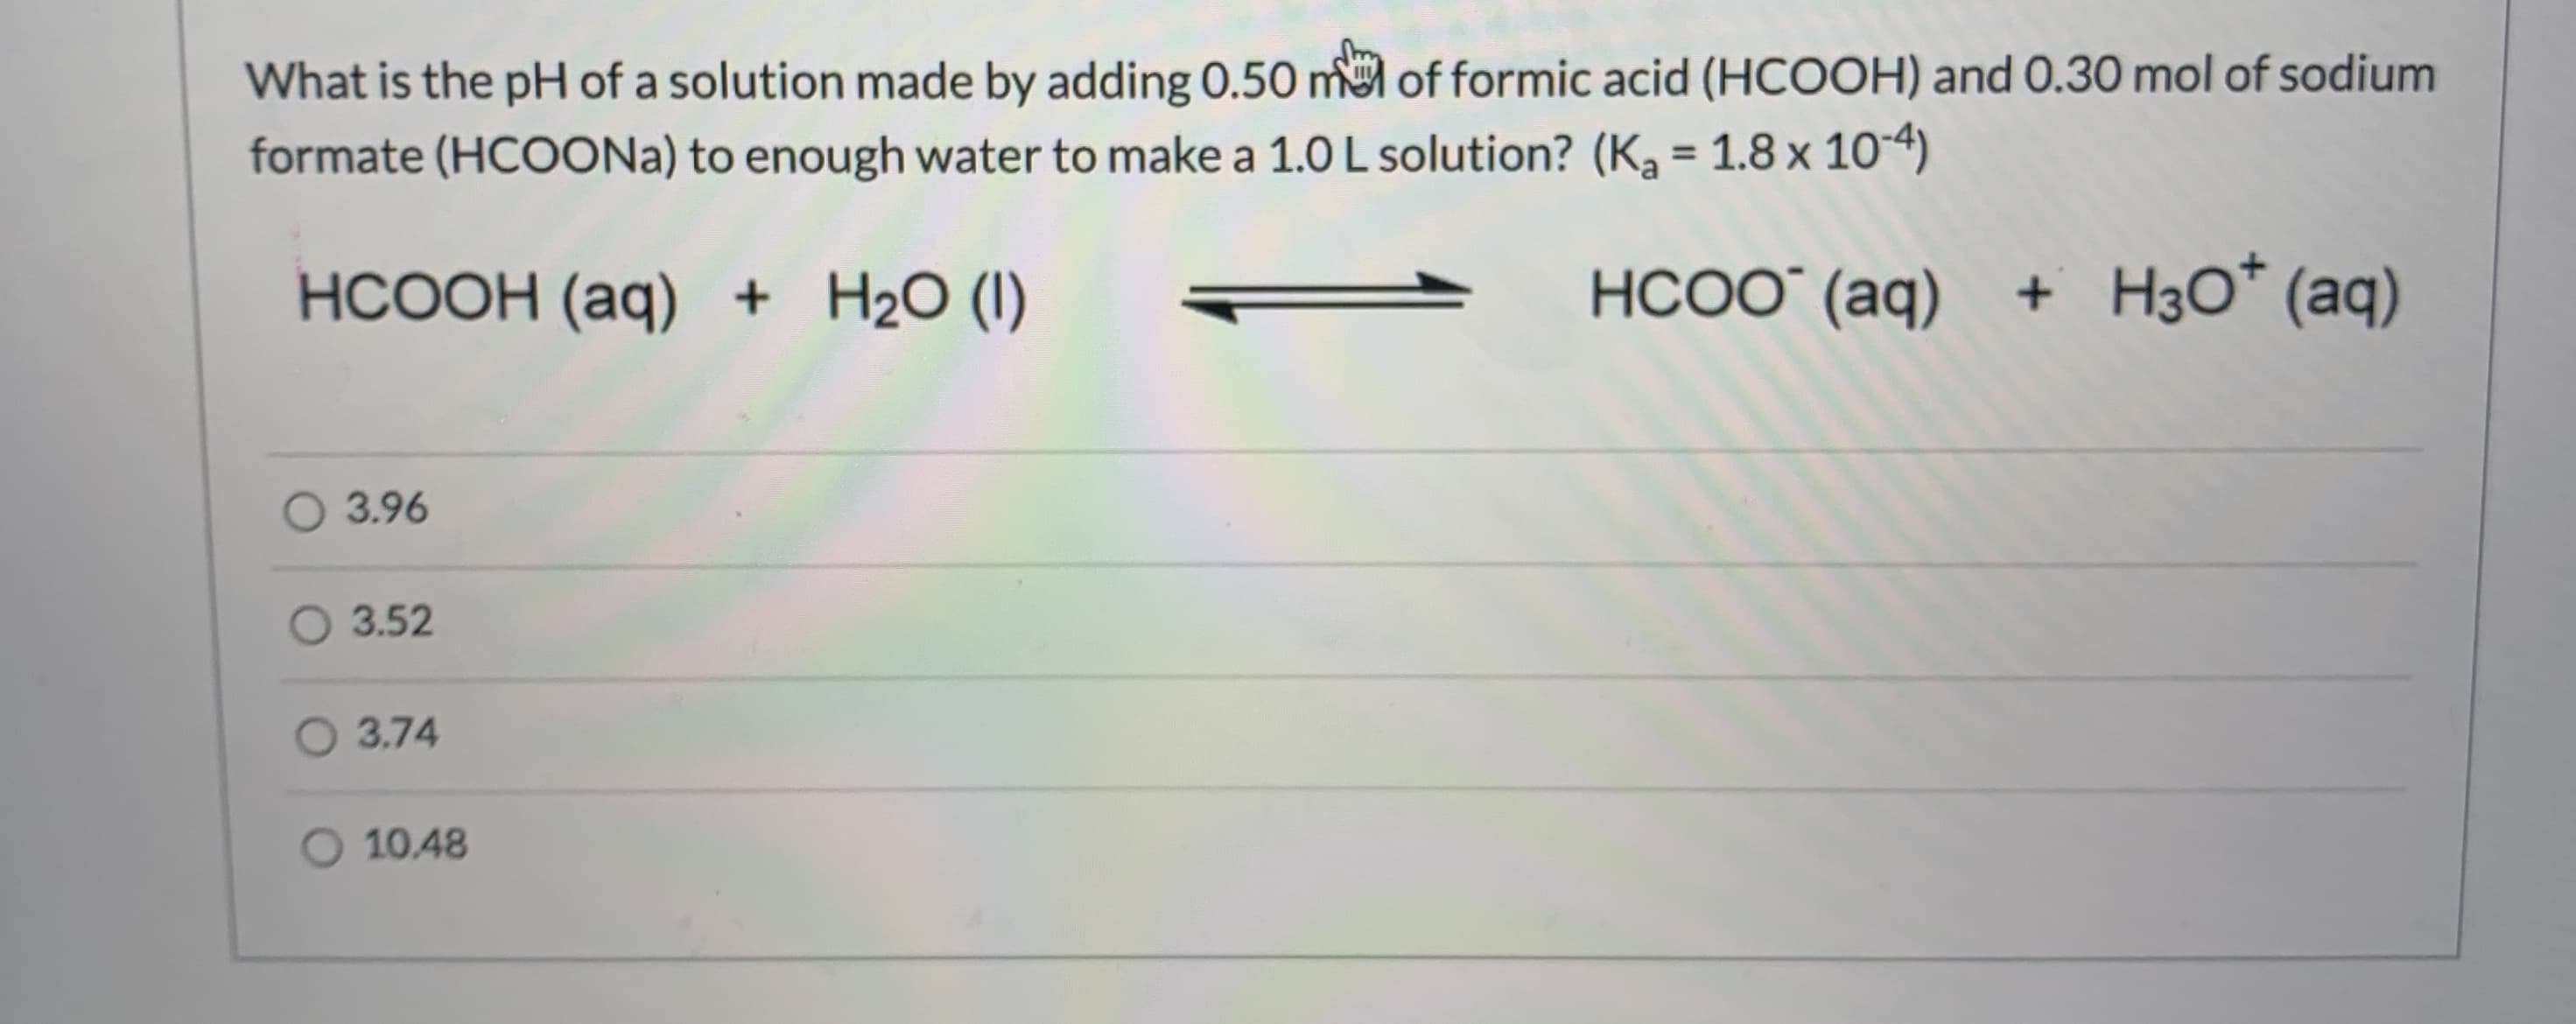 What is the pH of a solution made by adding 0.50 m of formic acid (HCOOH) and 0.30 mol of sodium
formate (HCOONA) to enough water to make a 1.0 L solution? (Ka = 1.8 x 10-4)
%3D
HCOOH (aq) + H2O (I)
НСОО (аq)
+ H3O* (aq)
